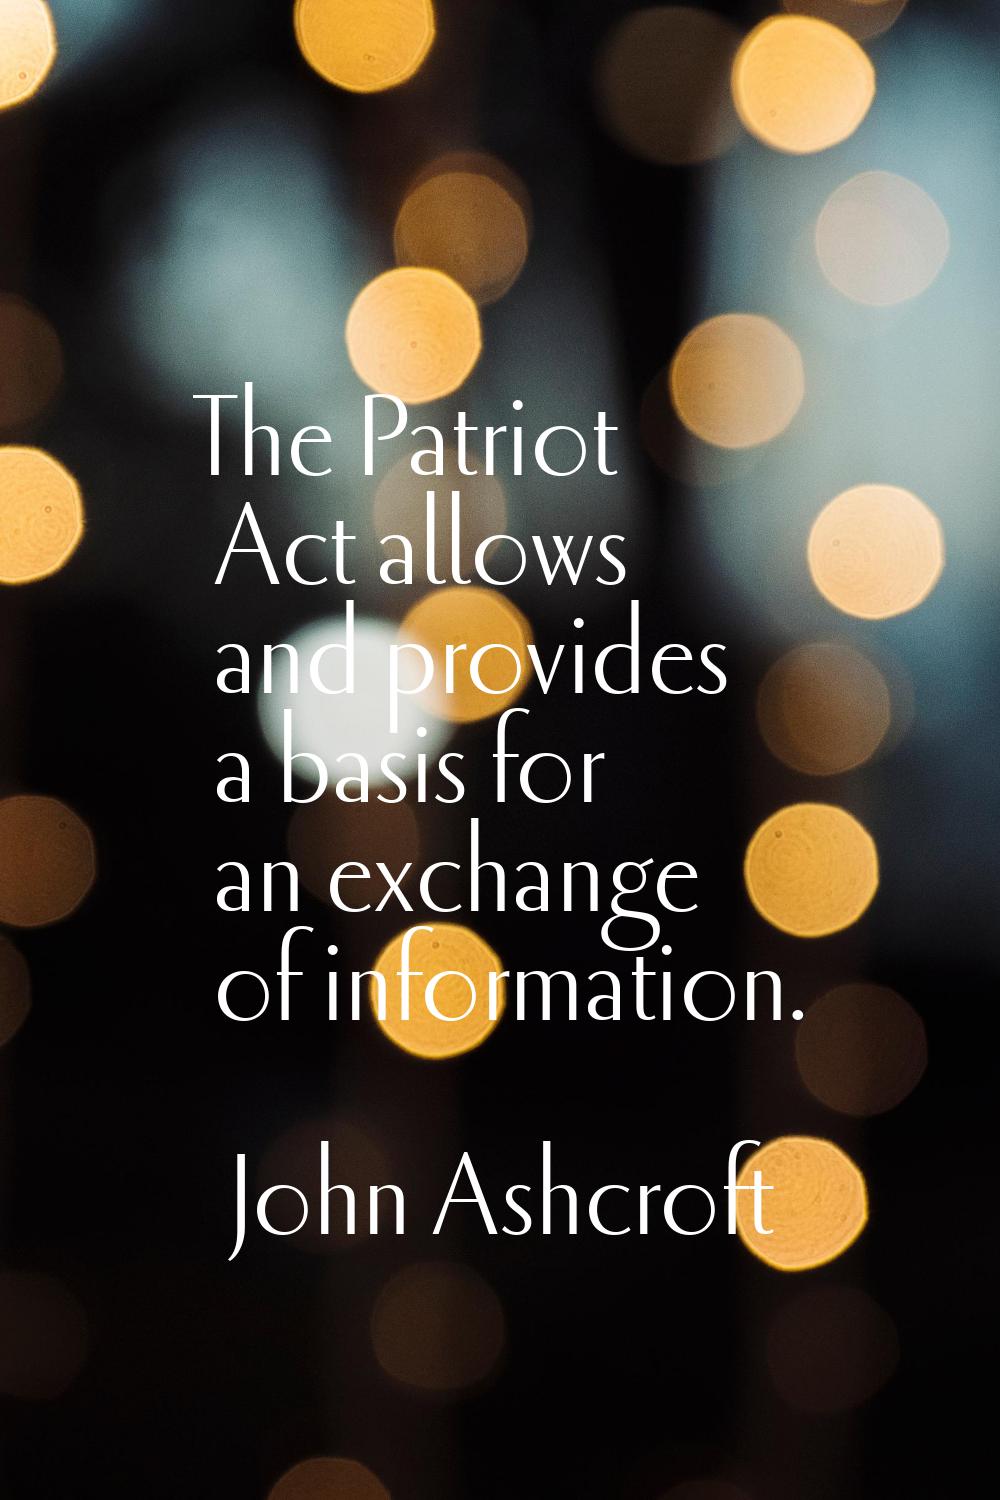 The Patriot Act allows and provides a basis for an exchange of information.